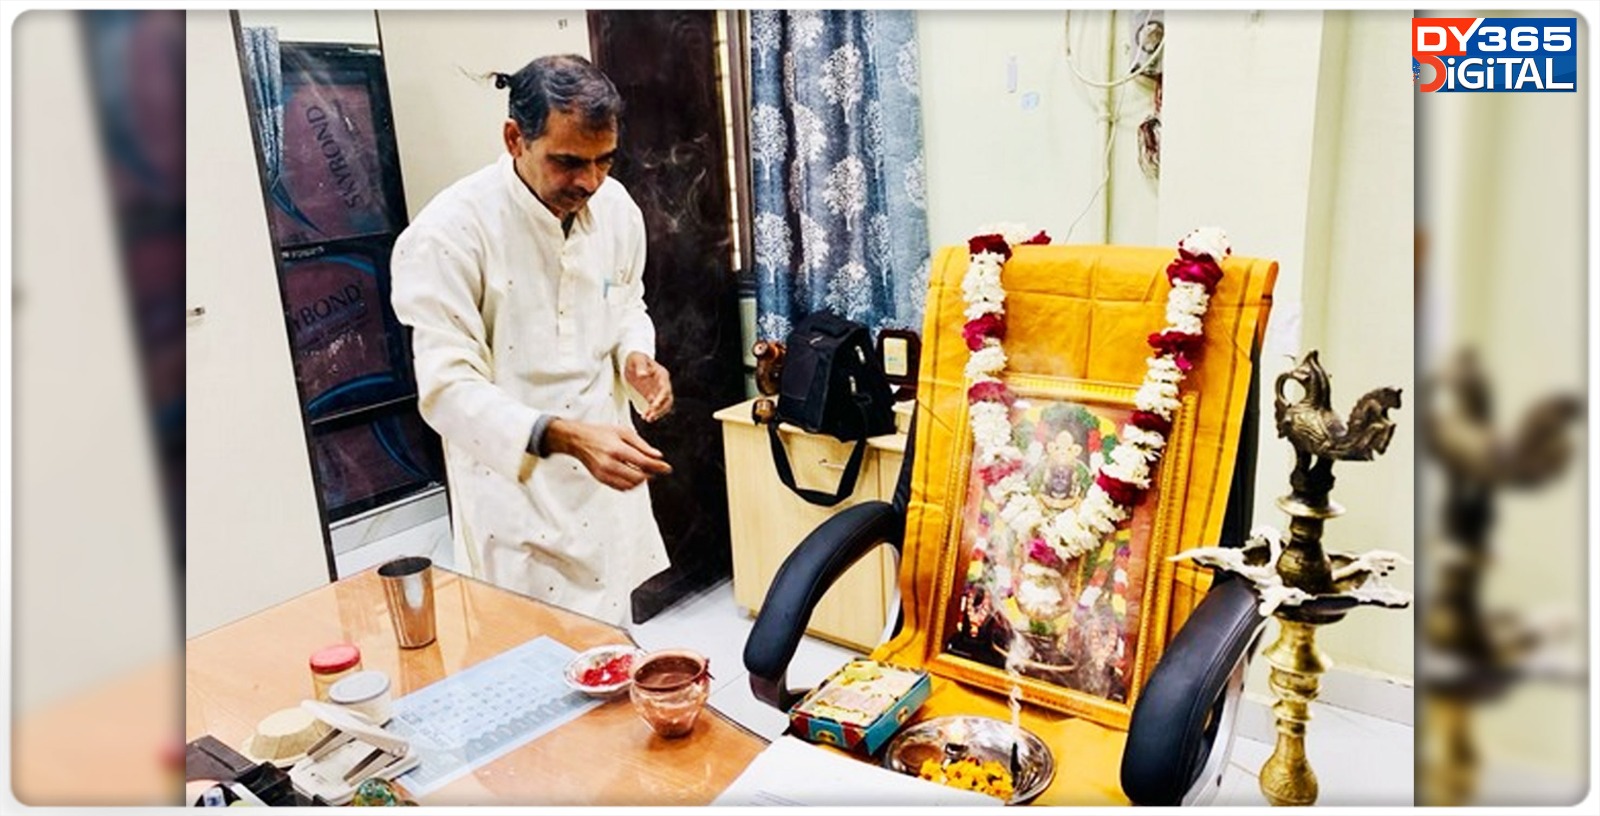 govt-college-principal-in-mp-places-picture-of-lord-ram-on-his-chair